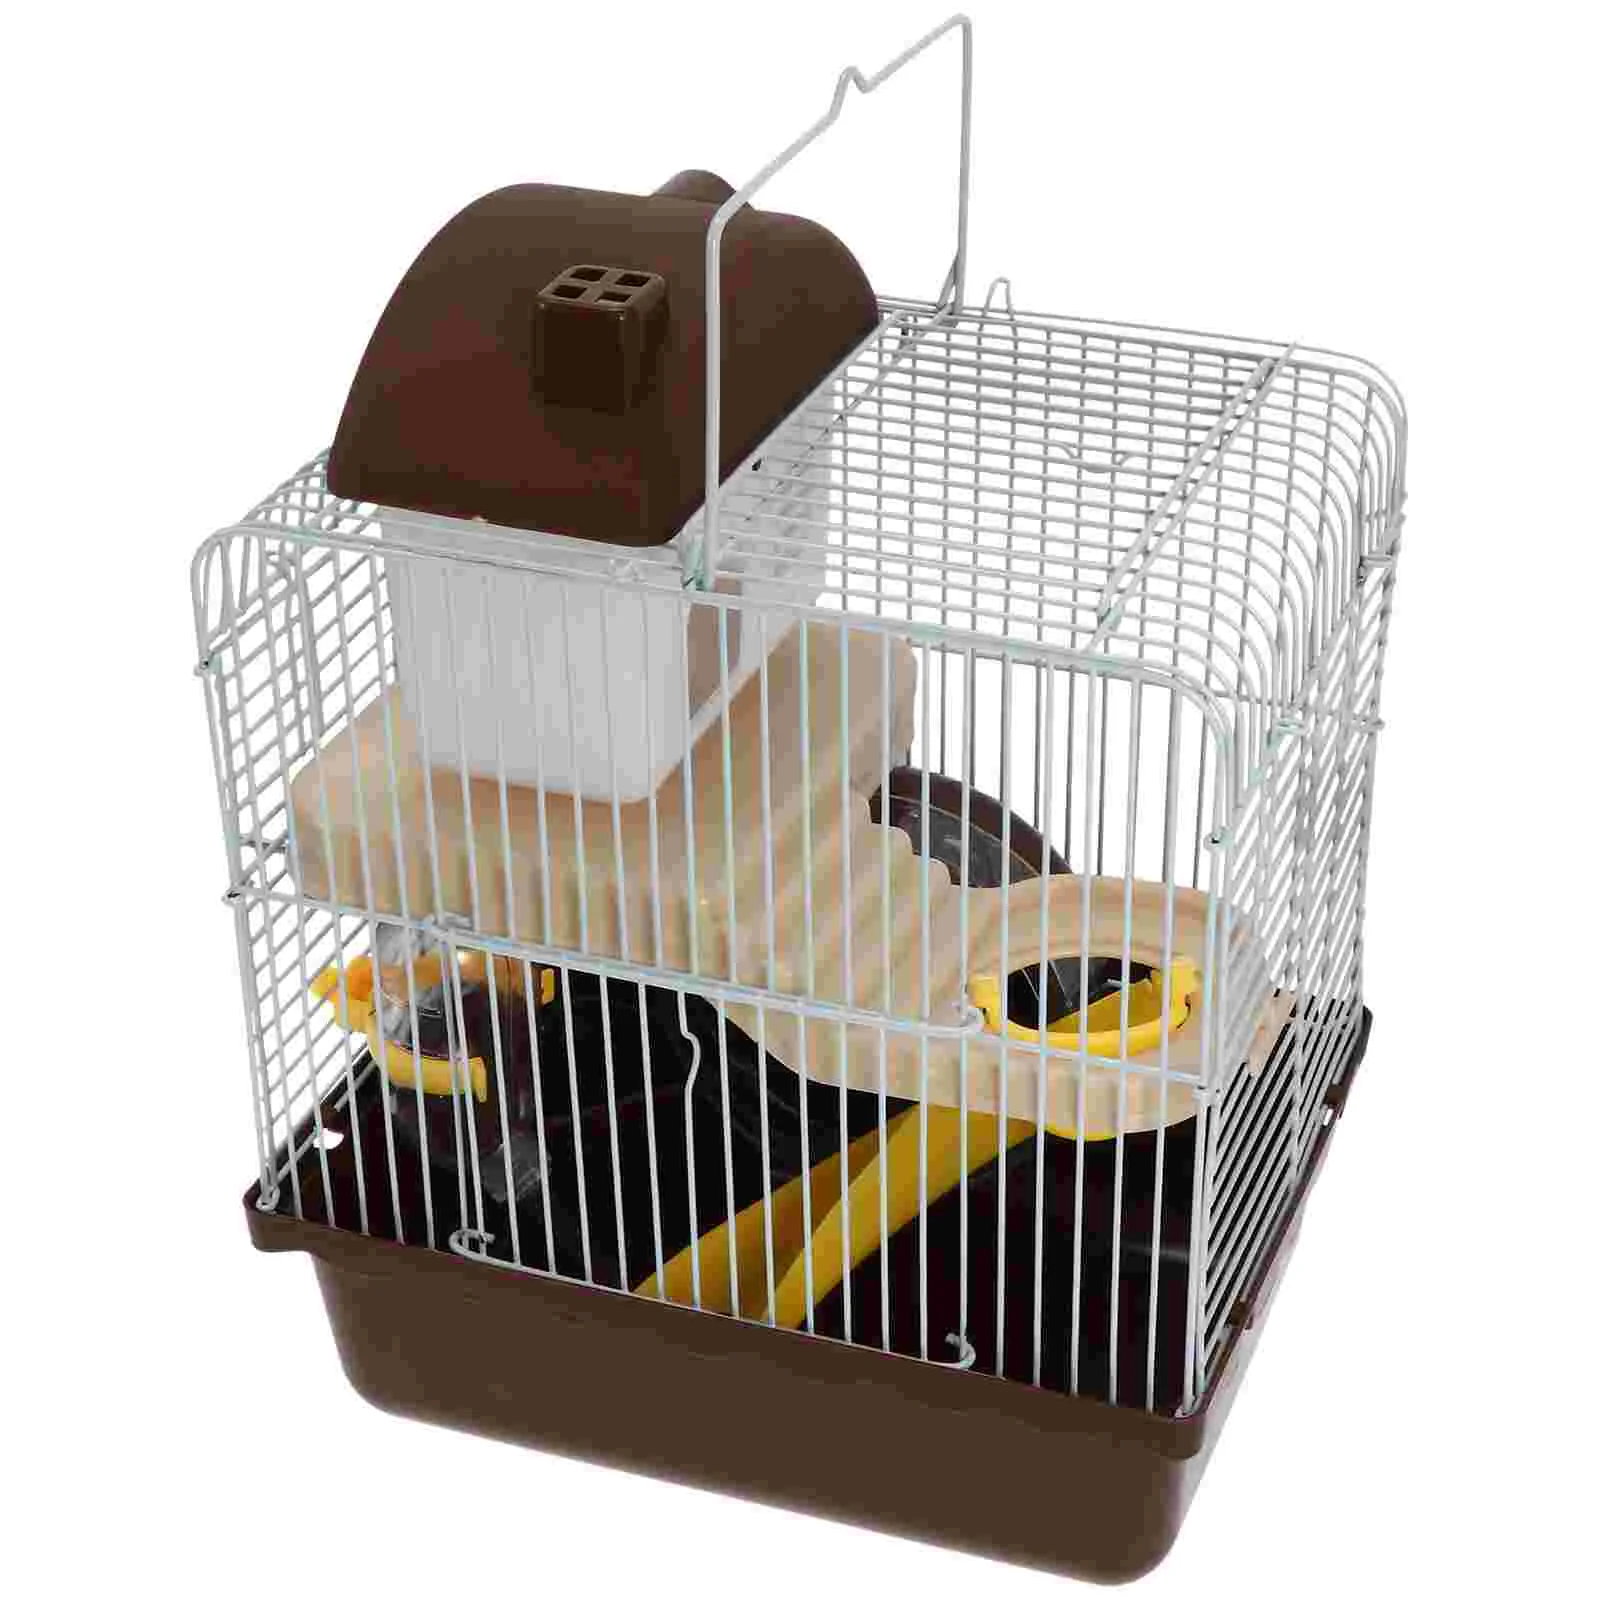 

Hamster Cage Pet Activity Hut Hideout Villa Mouse Small House Animal Plastic Nest Travel Toy